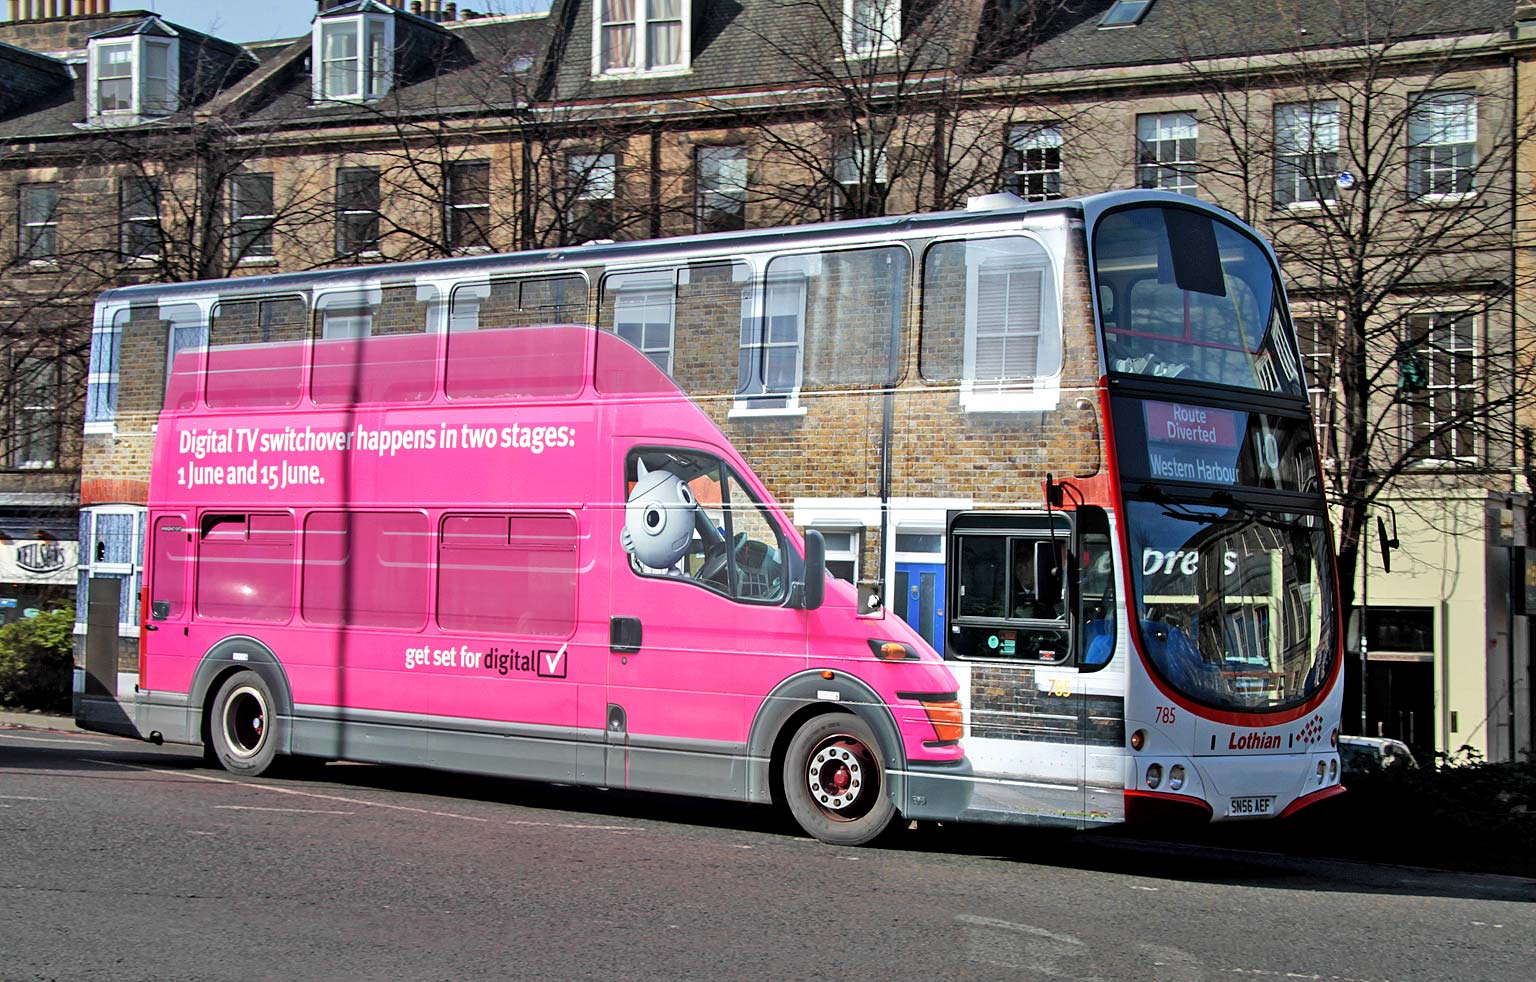 Lothian Buses  -  'All OverAdverts' on buses  -  Bus 785  -  Digital TV Switchover